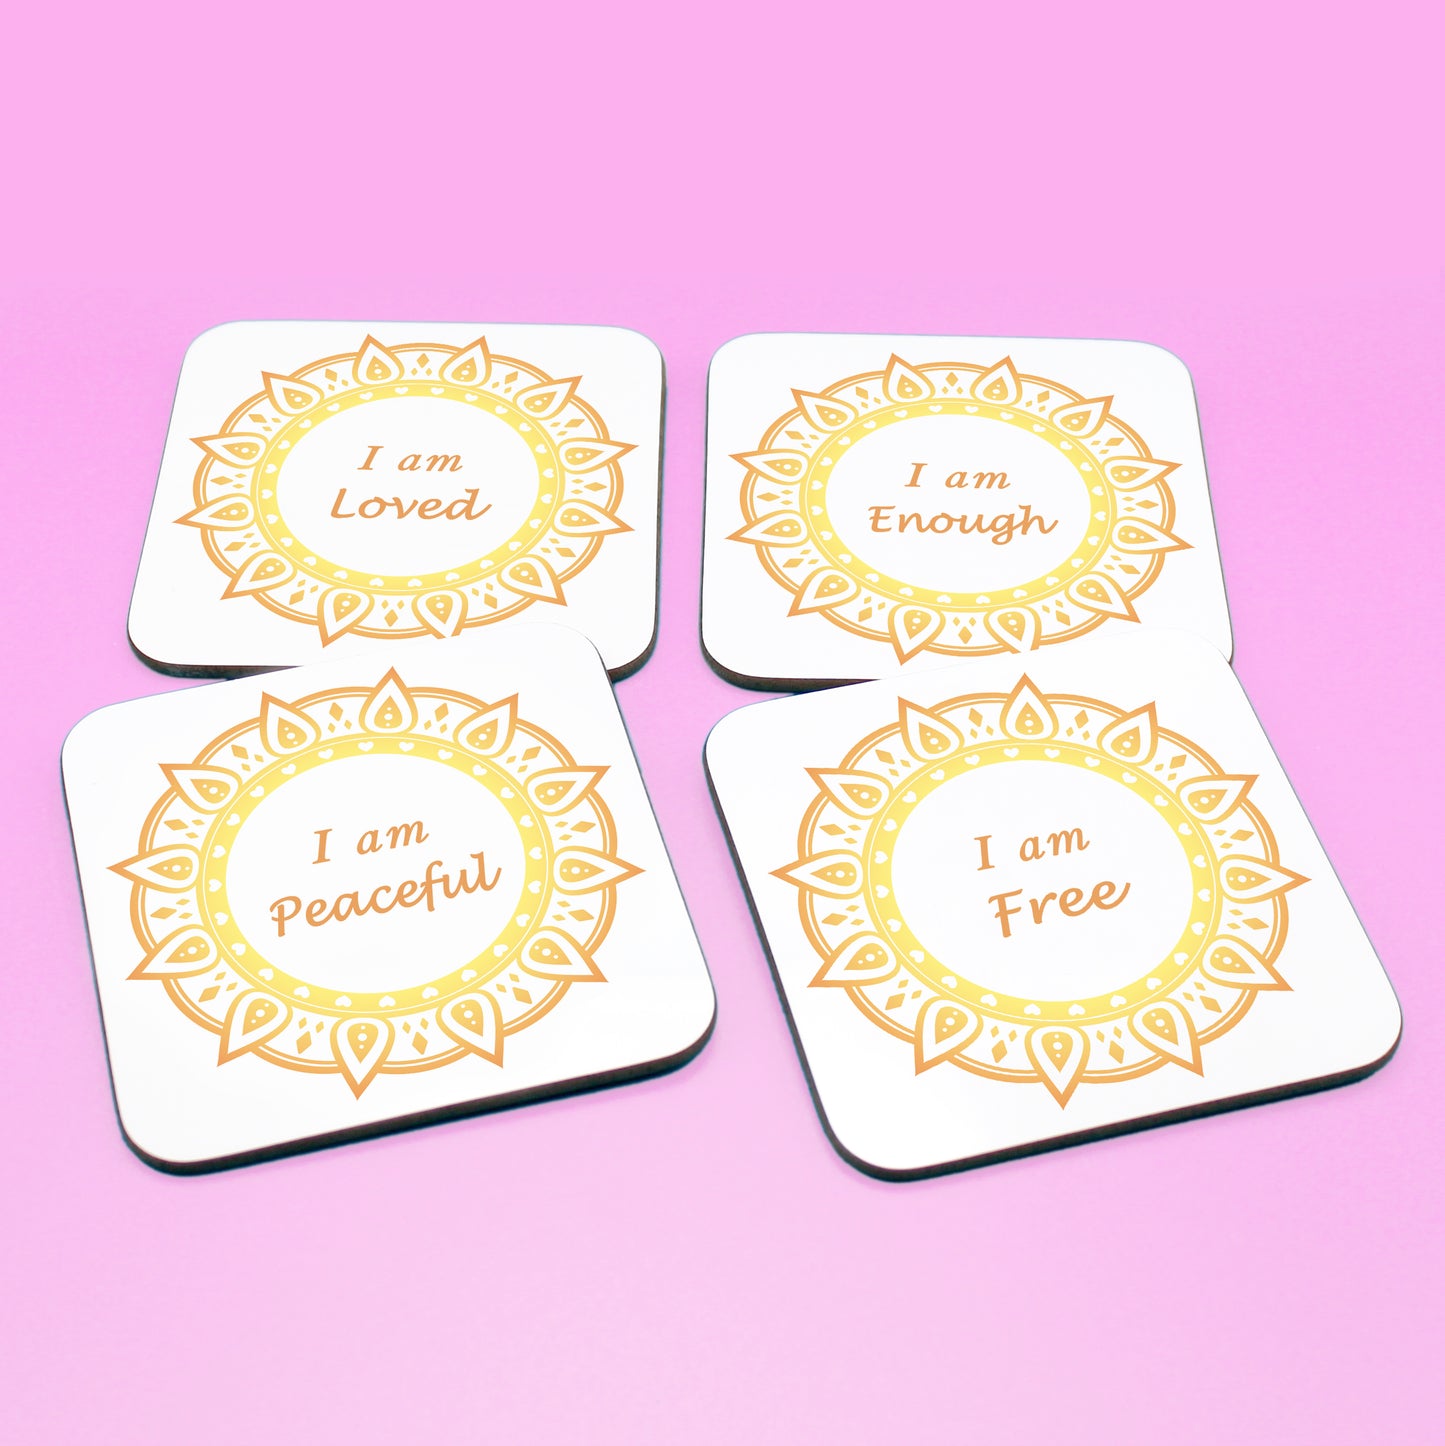 Wellbeing gift. Four square wooden backed personal affirmations coaster set. Theme is Letting Go in this set of four. Mandala design with daily affirmation wording inside the mandala.  Affirmations read I am Loved, I am Enough, I am Peaceful, I am Free (all coaster mandalas are a yellow and orange mandala),